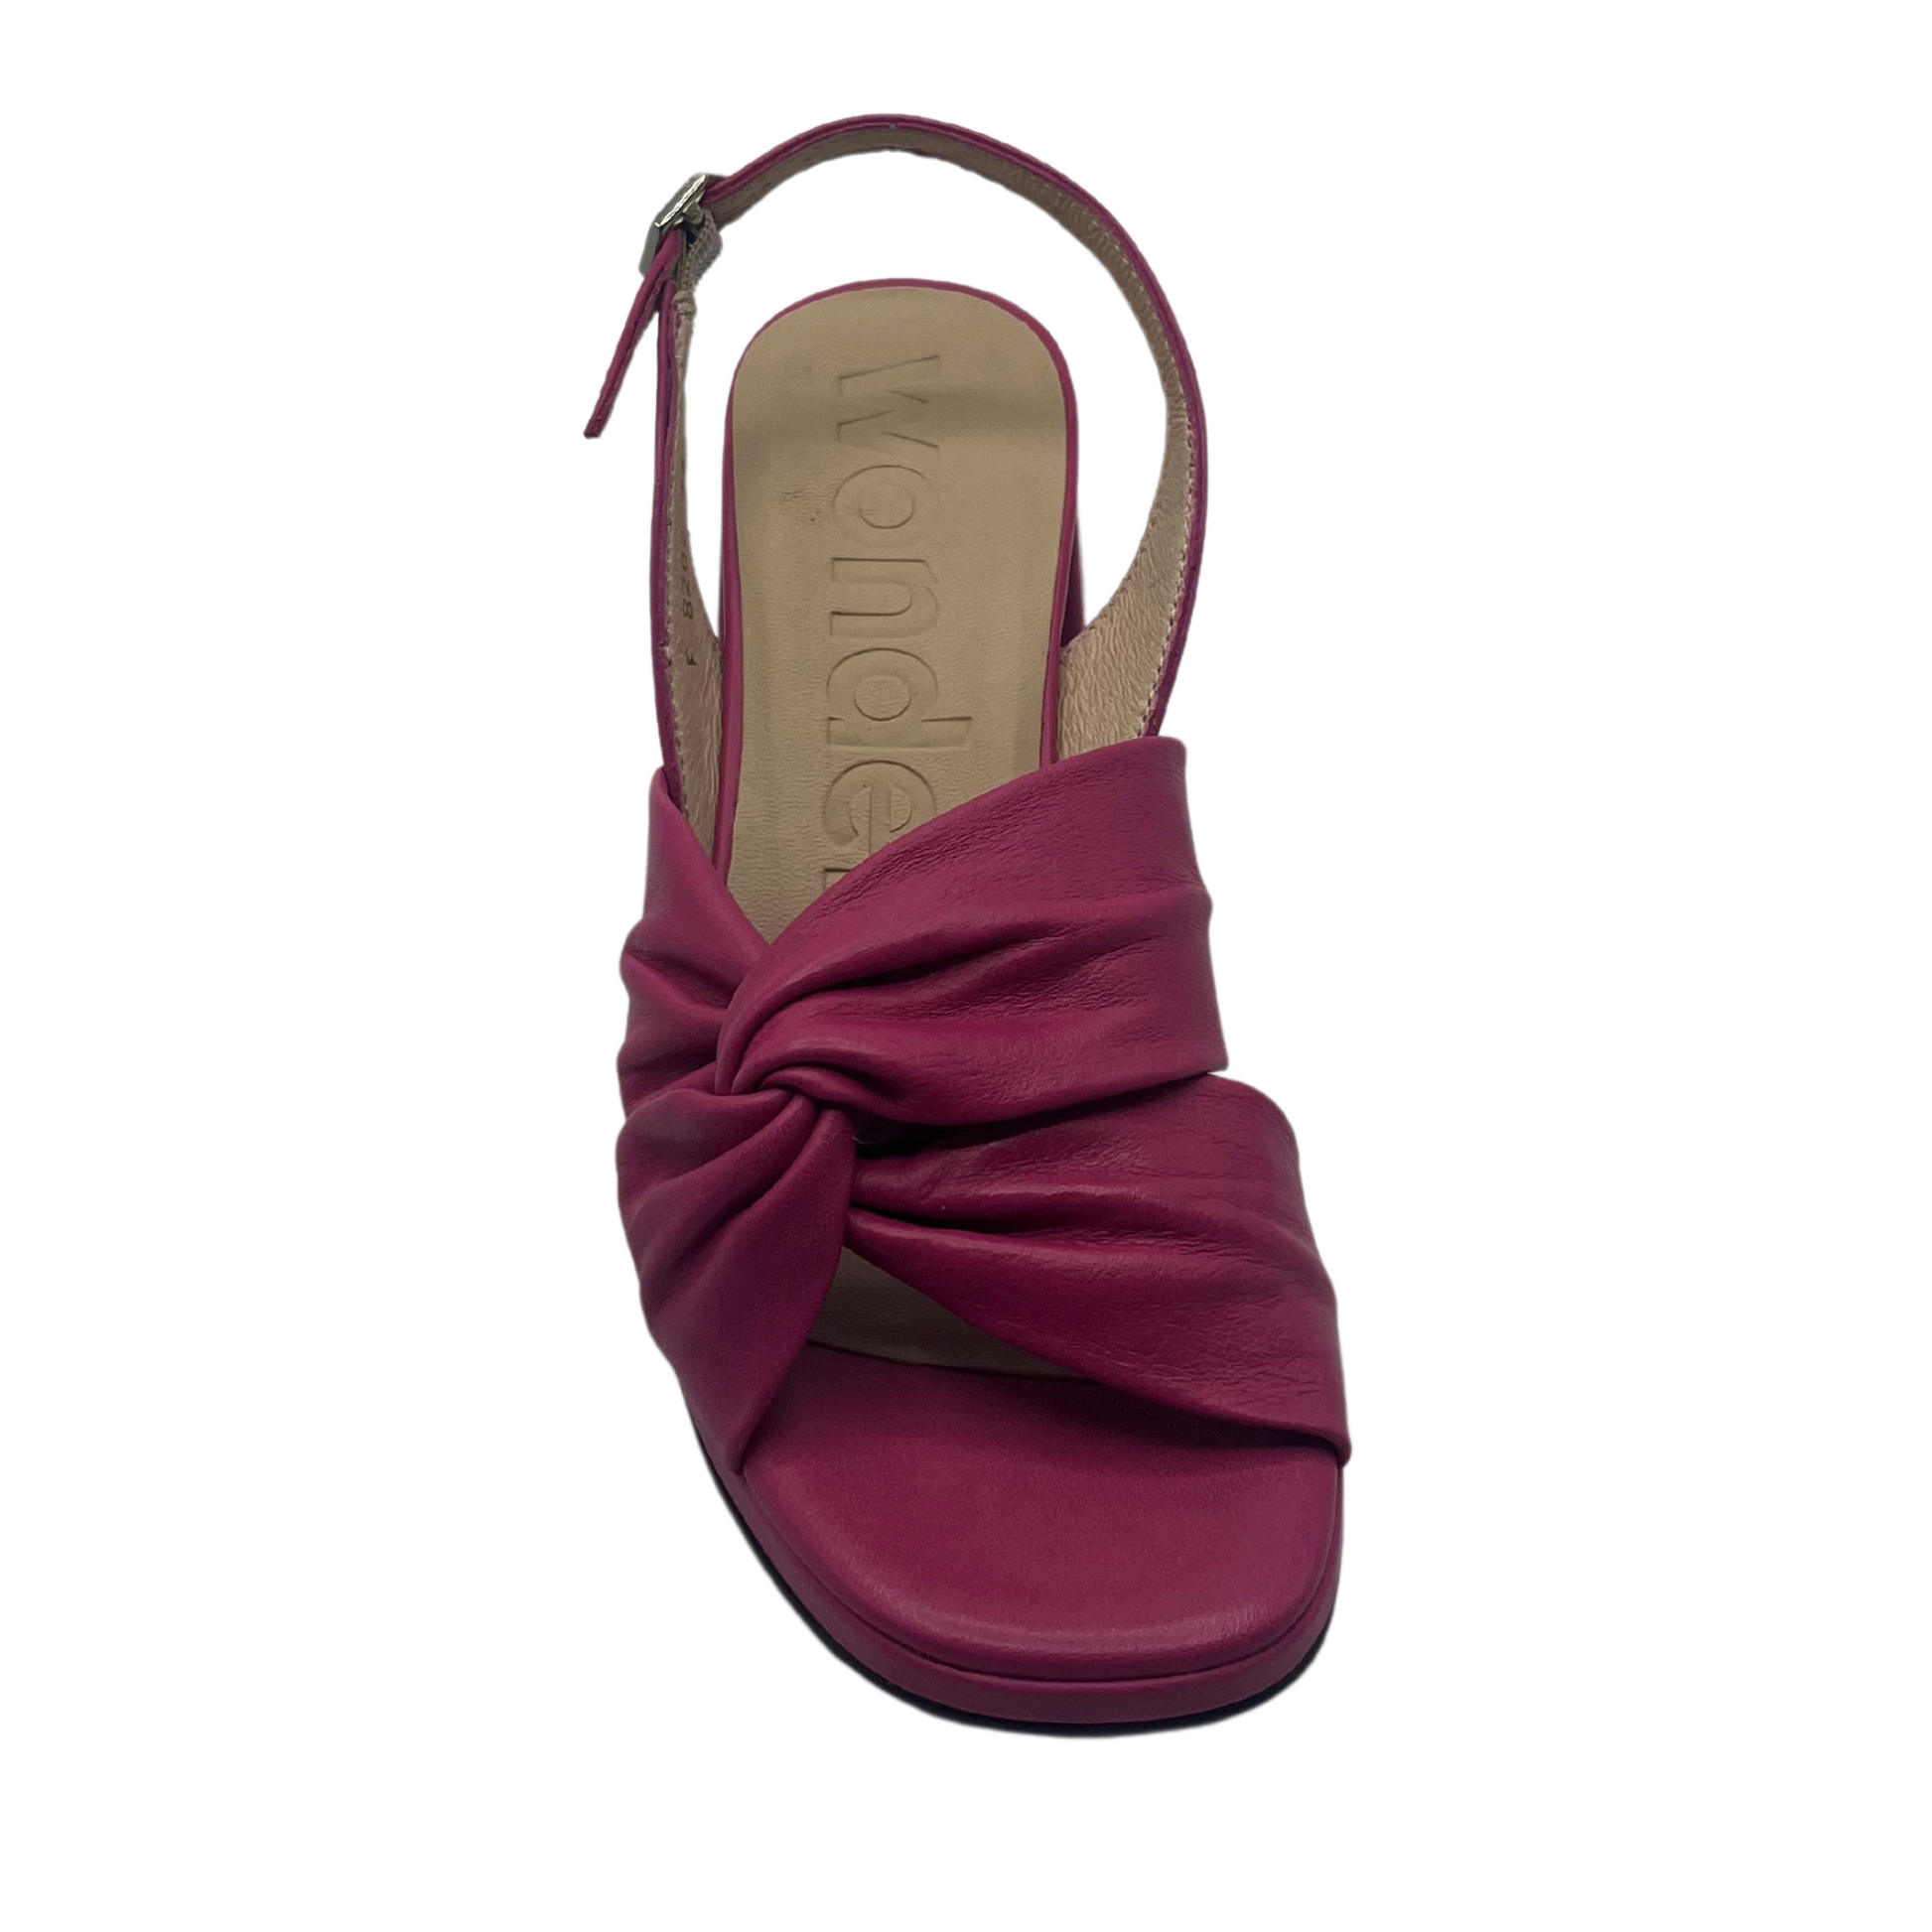 Top view of orchid leather sandal with square toe and buckle strap